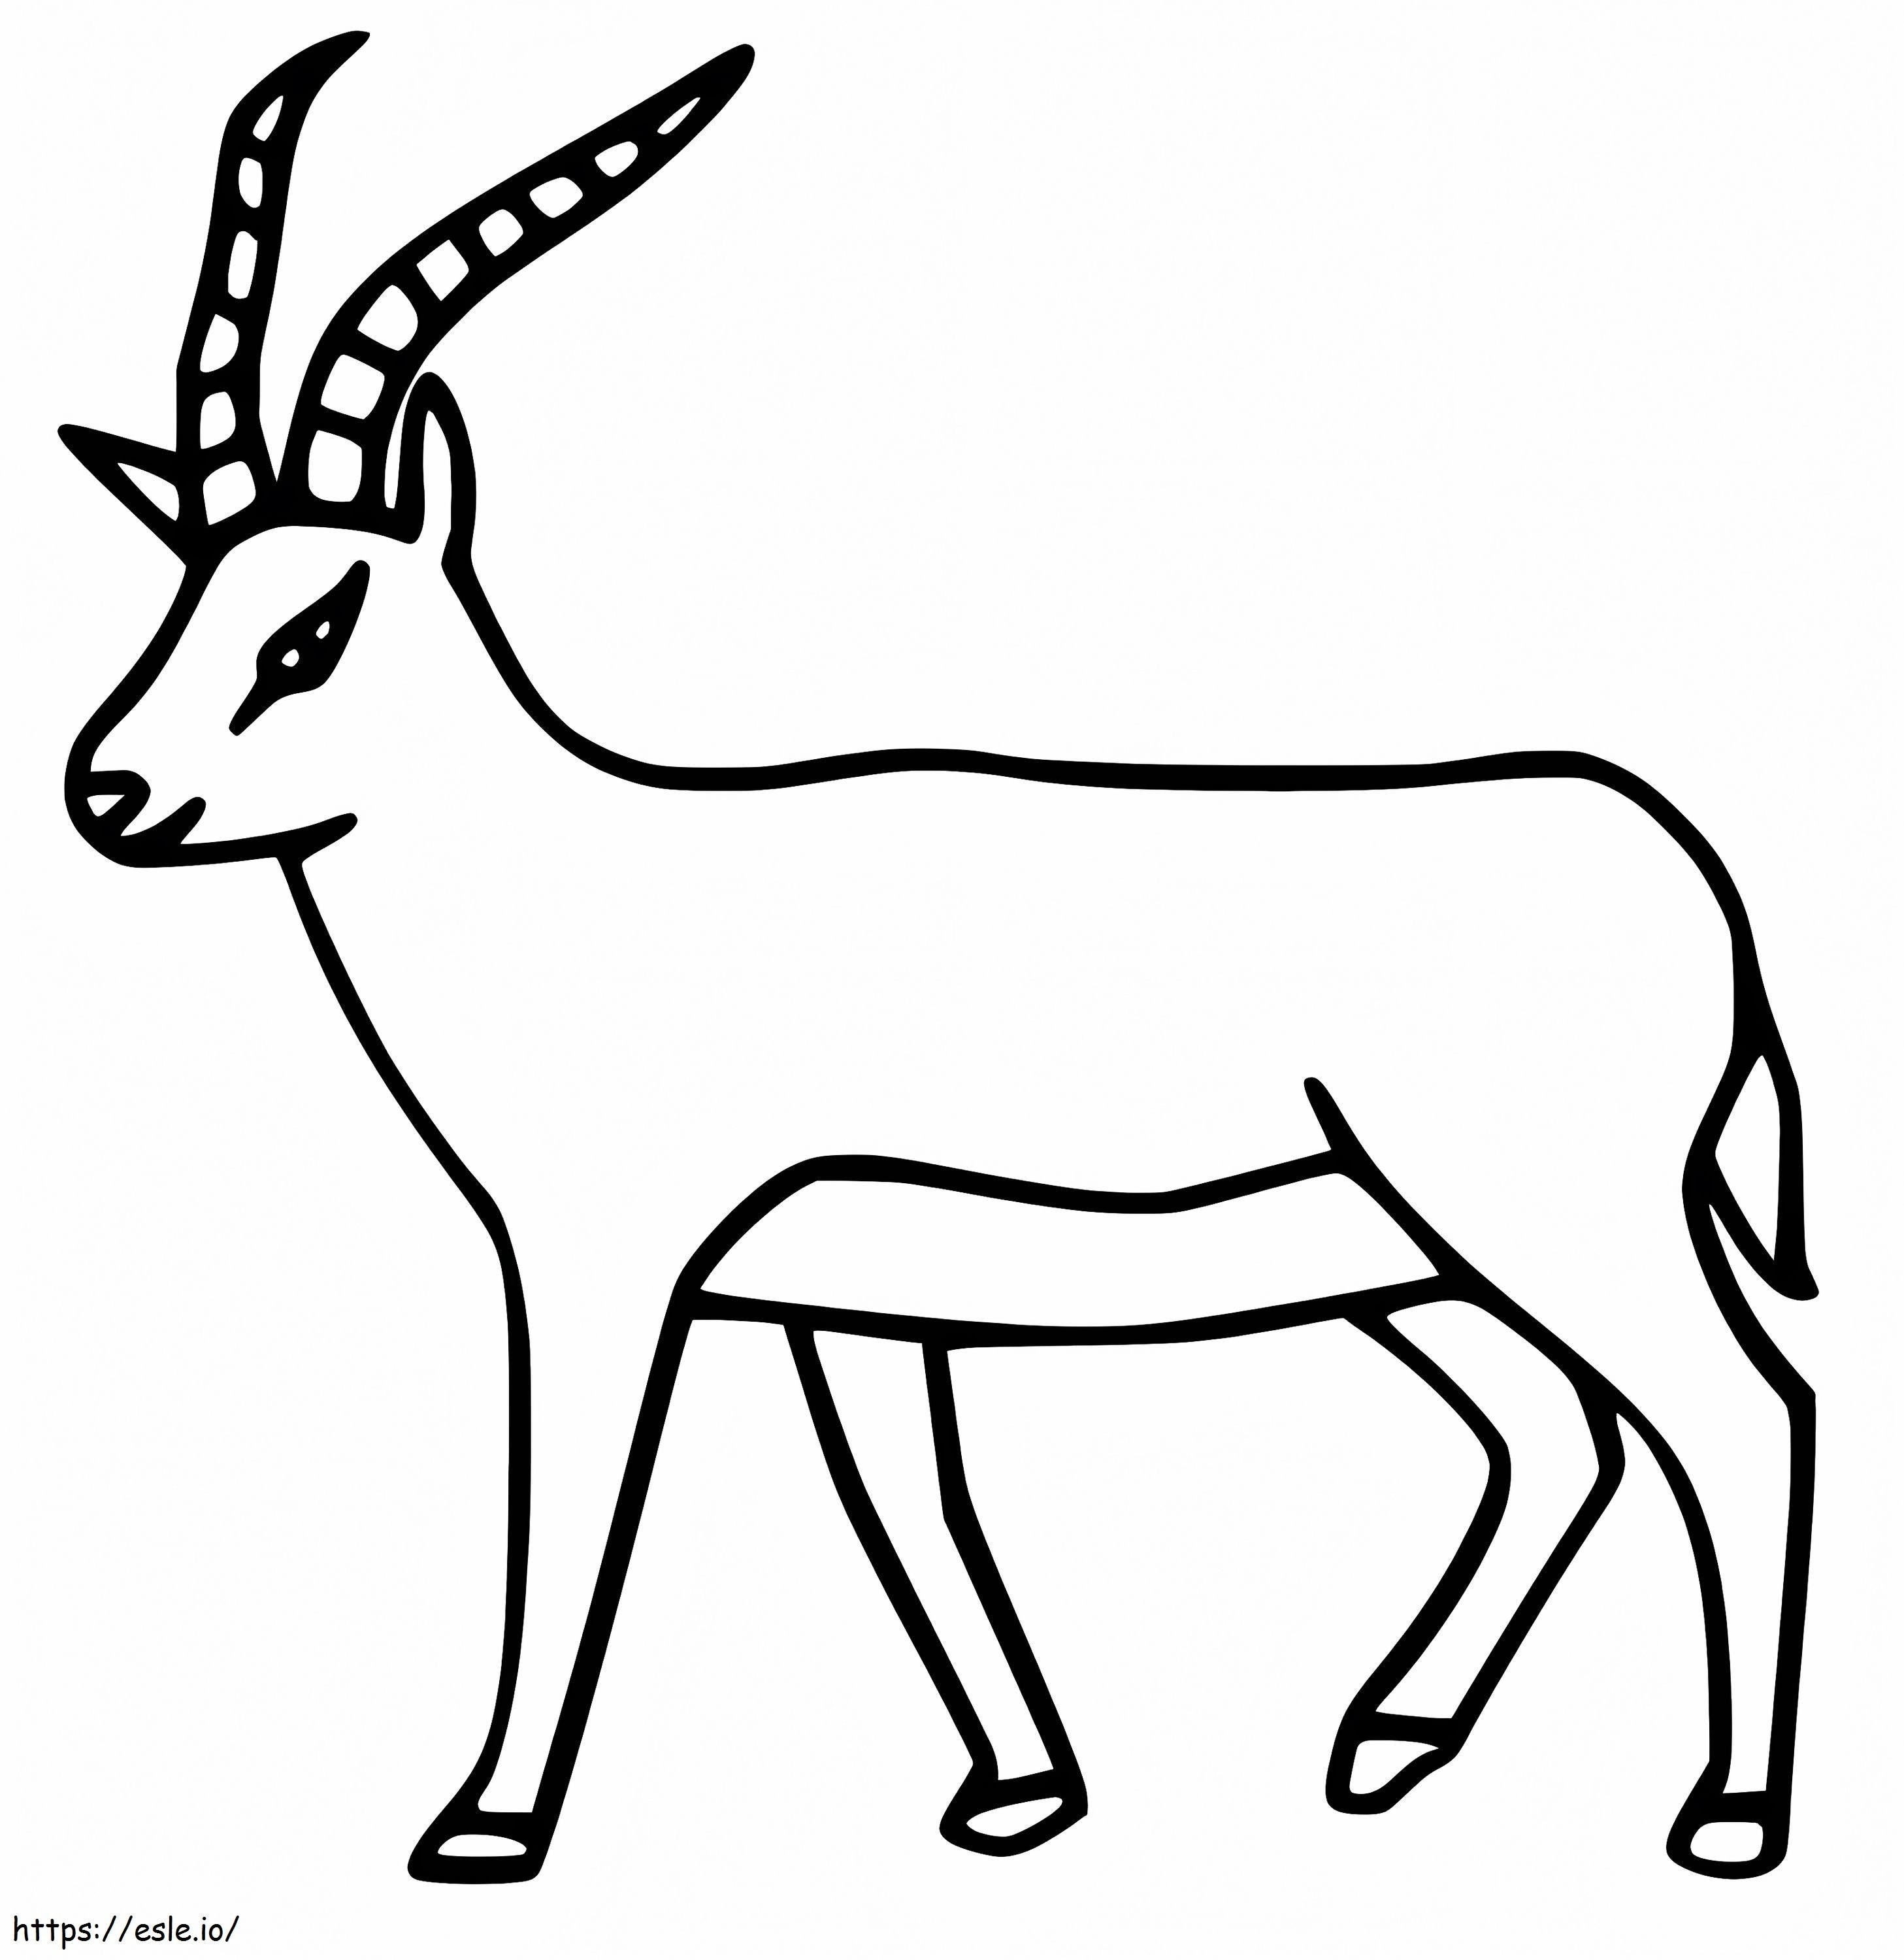 Antelope 2 coloring page